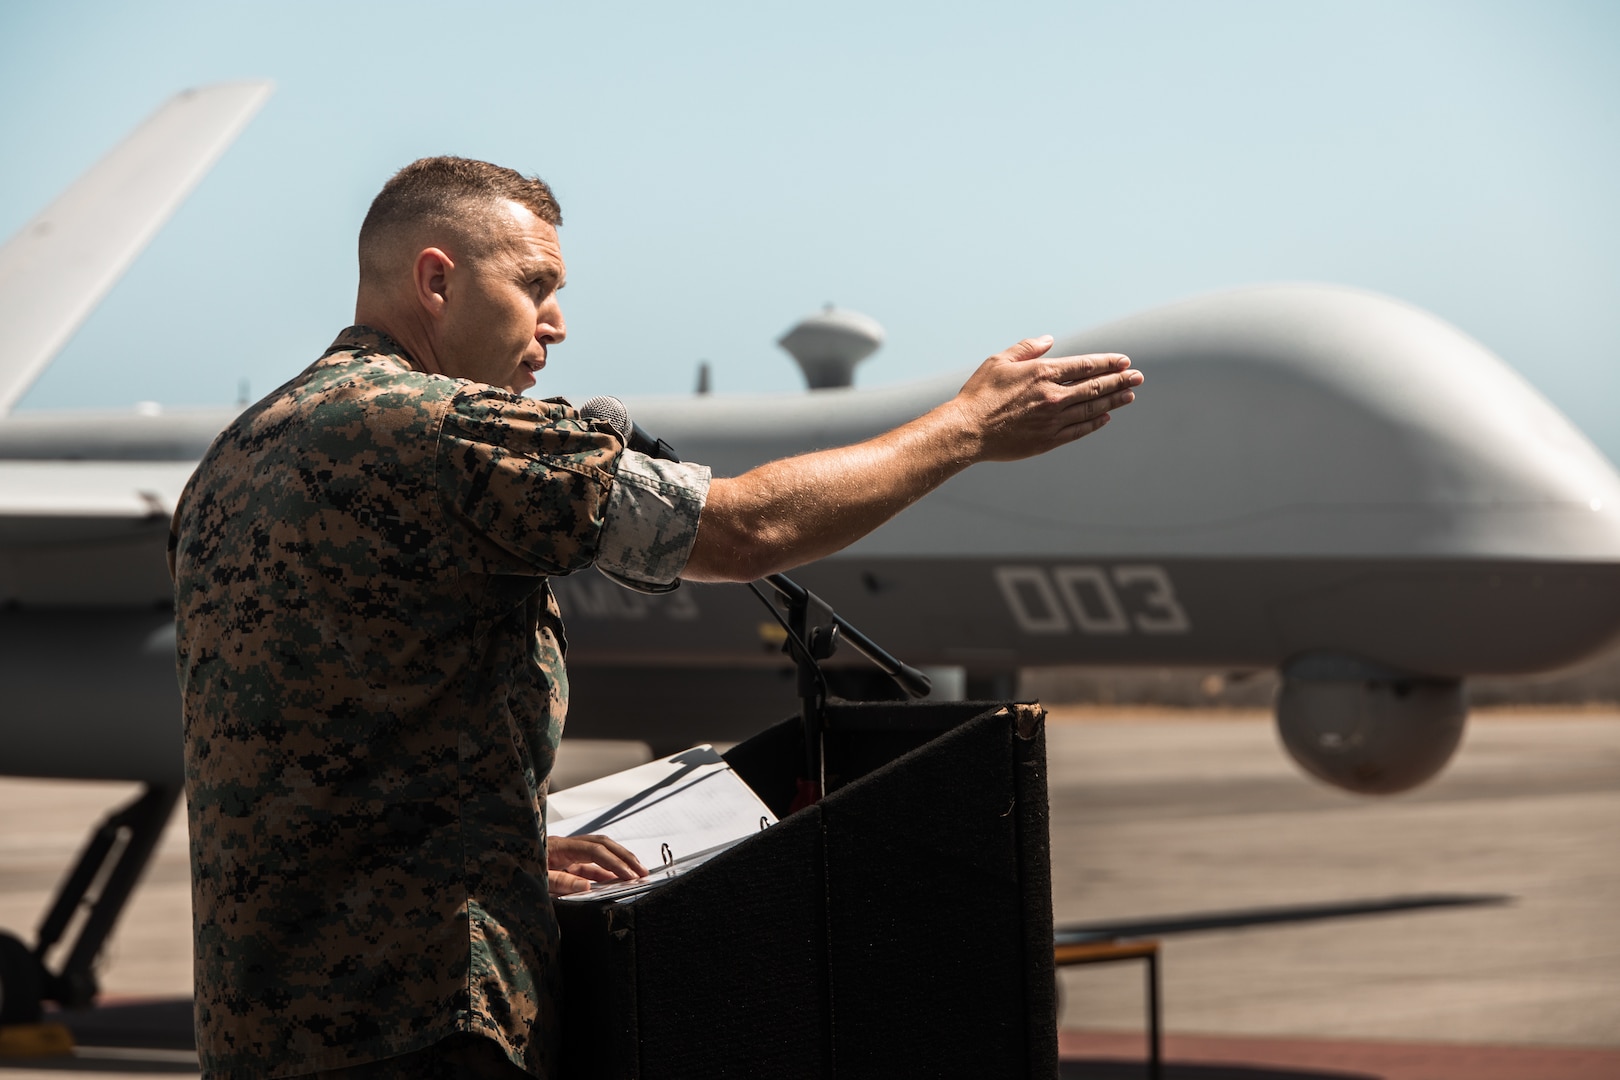 U.S. Marine Corps Lt. Col. Nicholas B. Law addresses the audience during a ceremony for Marine Unmanned Aerial Vehicle Squadron 3 (VMU-3), Marine Aircraft Group 24, 1st Marine Aircraft Wing at Marine Corps Air Station Kaneohe Bay, Aug 2, 2023. The ceremony commemorated the squadron’s years of dedicated effort and work to reach Initial Operational Capability with the MQ-9A. VMU-3 can support the Marine Air-Ground Task Force by providing multi-surveillance and reconnaissance, data gateway and relay capabilities, and enabling or conducting the detection and cross cueing of targets and facilitating their engagement during expeditionary, joint and combined operations. (U.S. Marine Corps photo by Cpl. Christian Tofteroo)